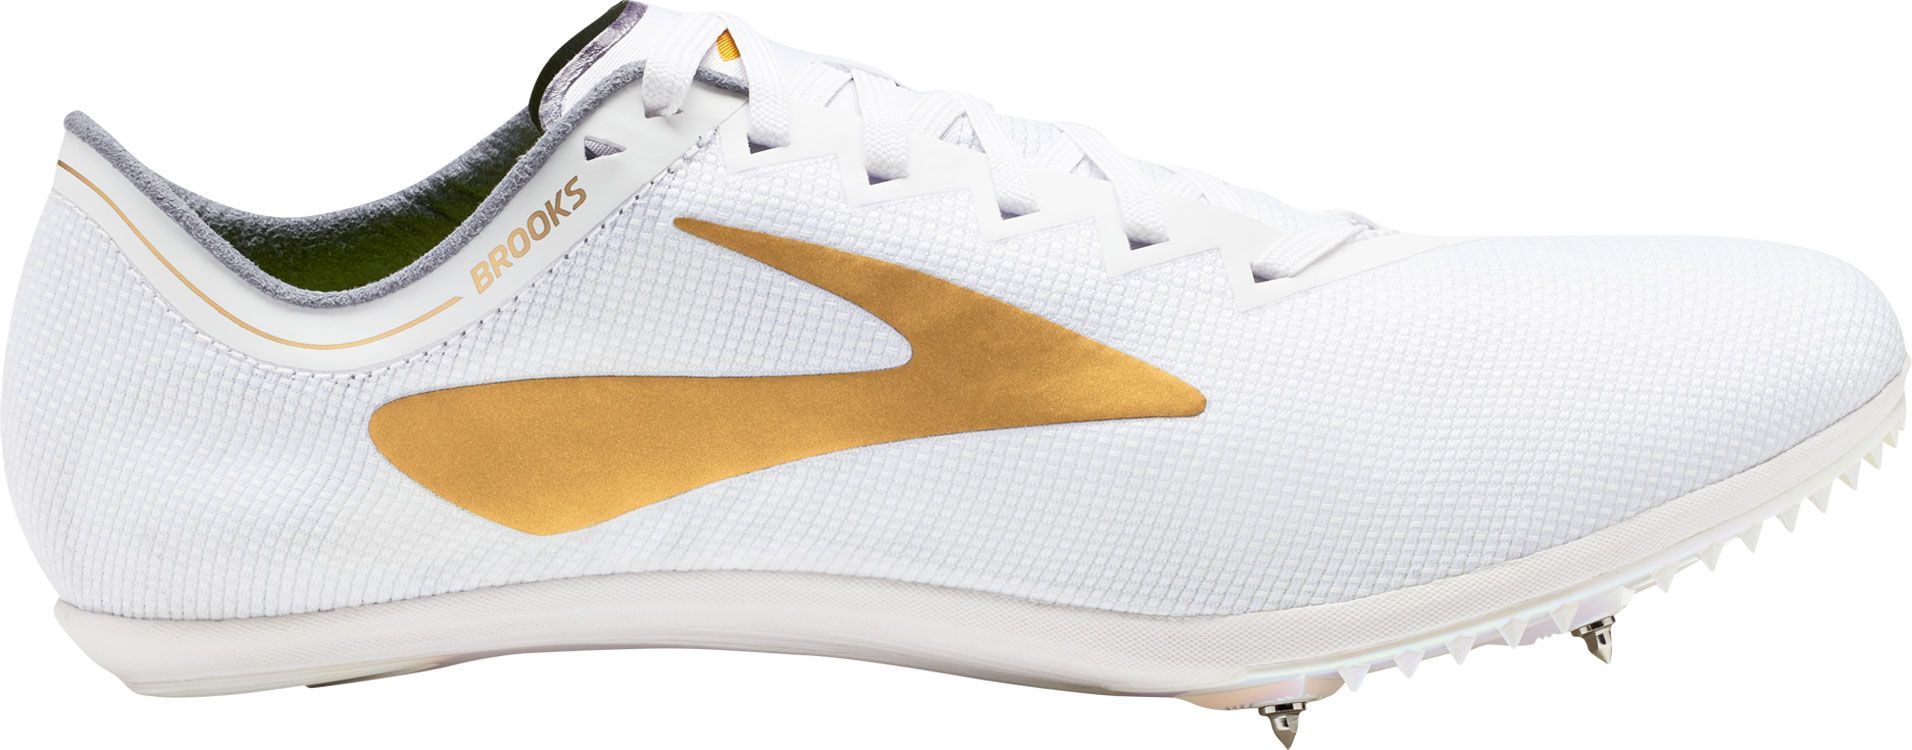 mens track spikes